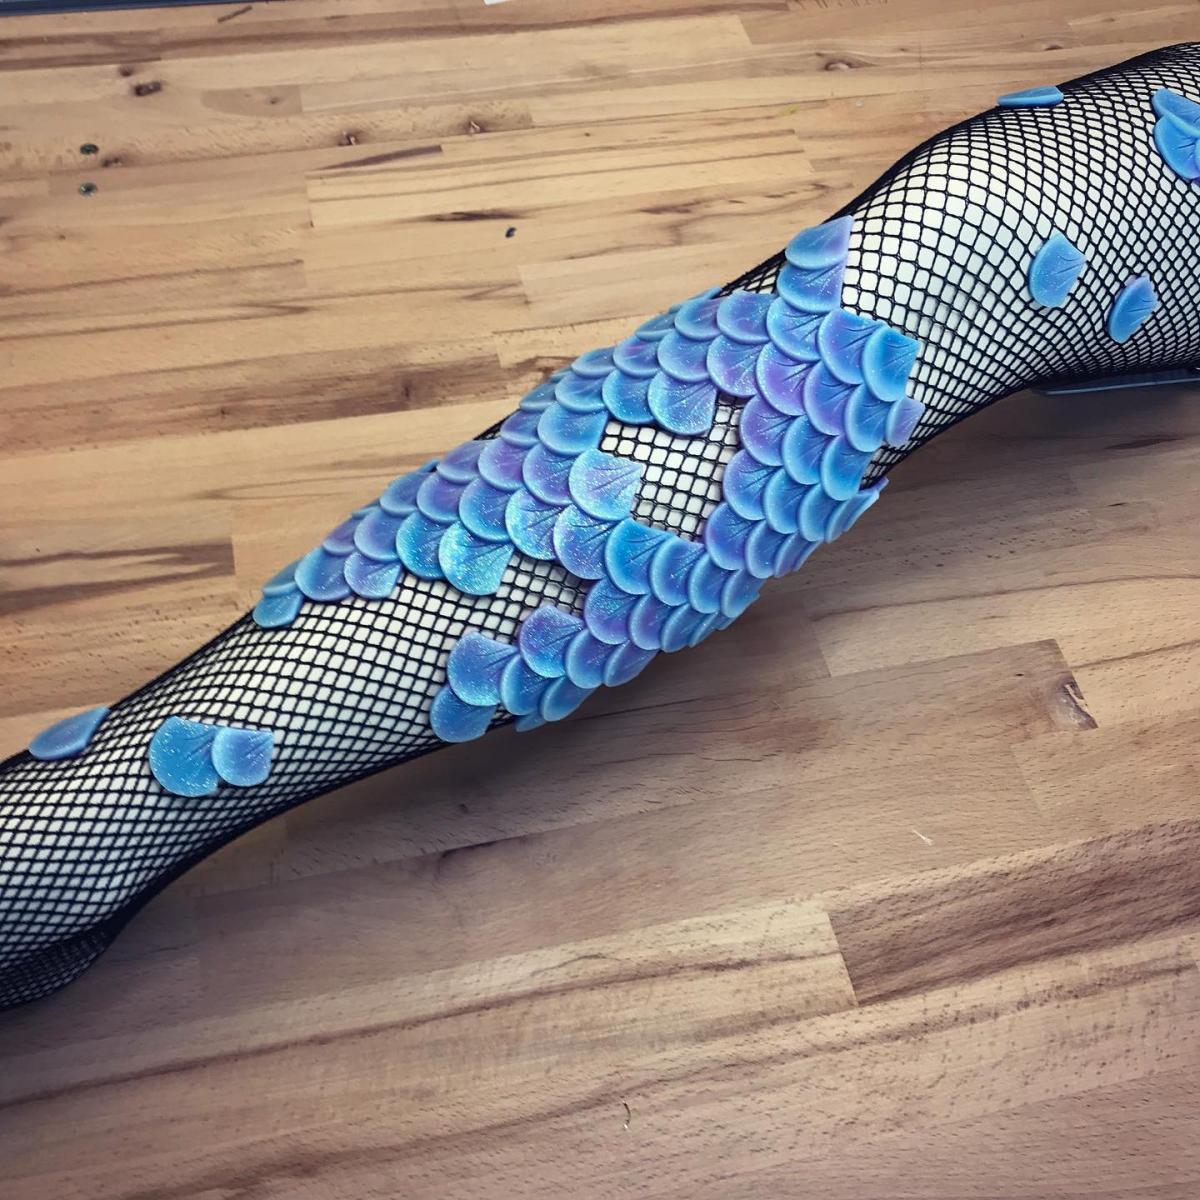 Daniel Struzyna Creates Beautiful Mermaid Tights With Colorful Scales